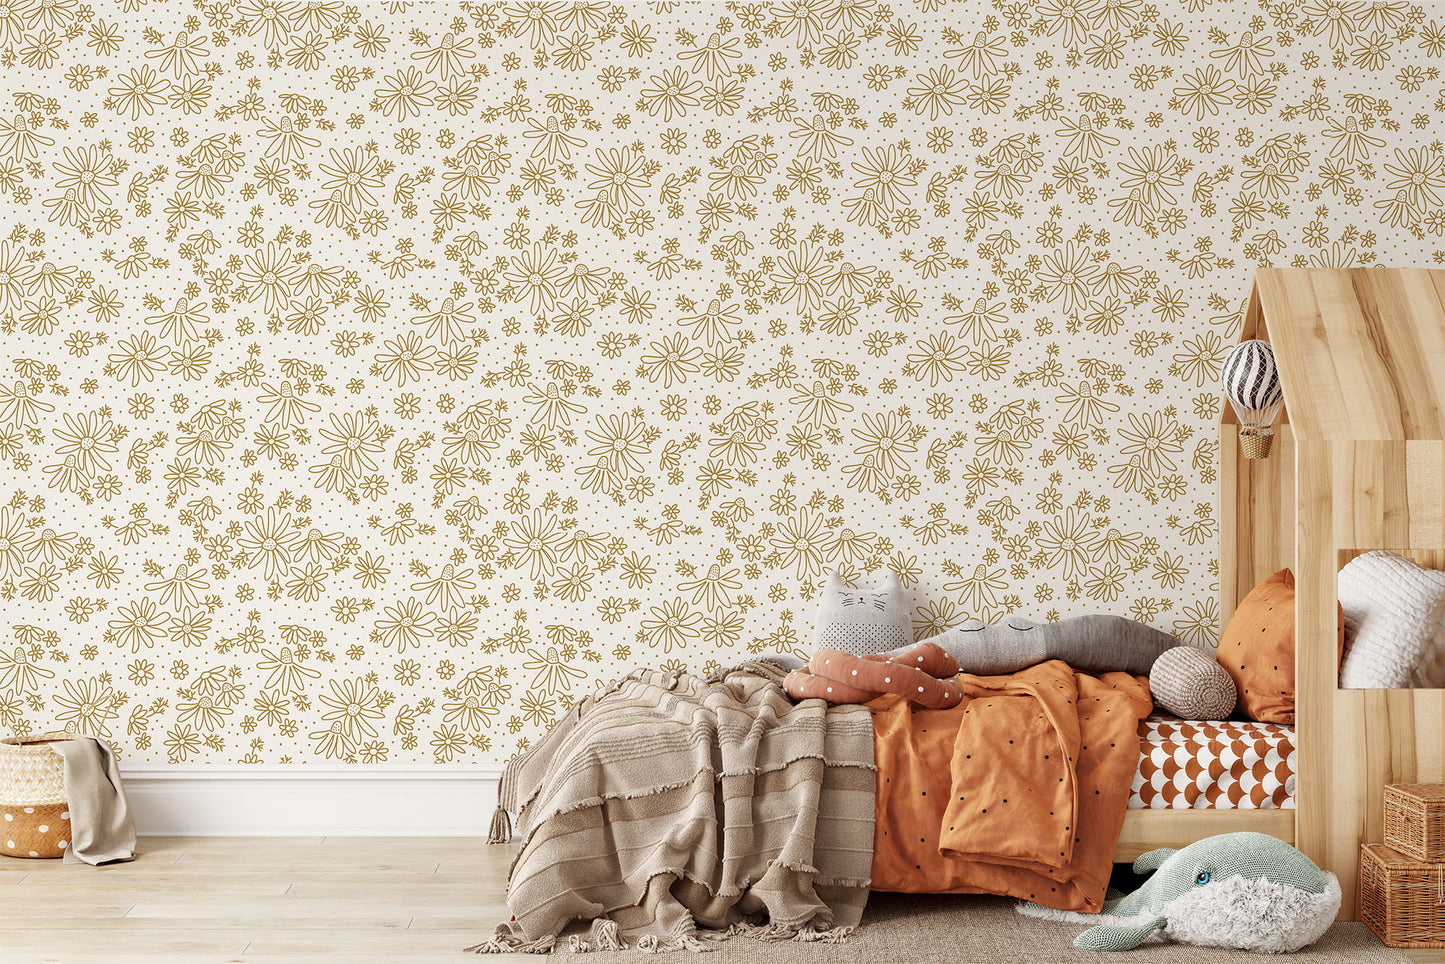 Golden/yellow retro daisy floral design on cream background easy to install and remove peel and stick custom wallpaper available in different lengths/sizes locally created and printed in Canada Artichoke wallpaper. Washable, durable, commercial grade, removable and waterproof.